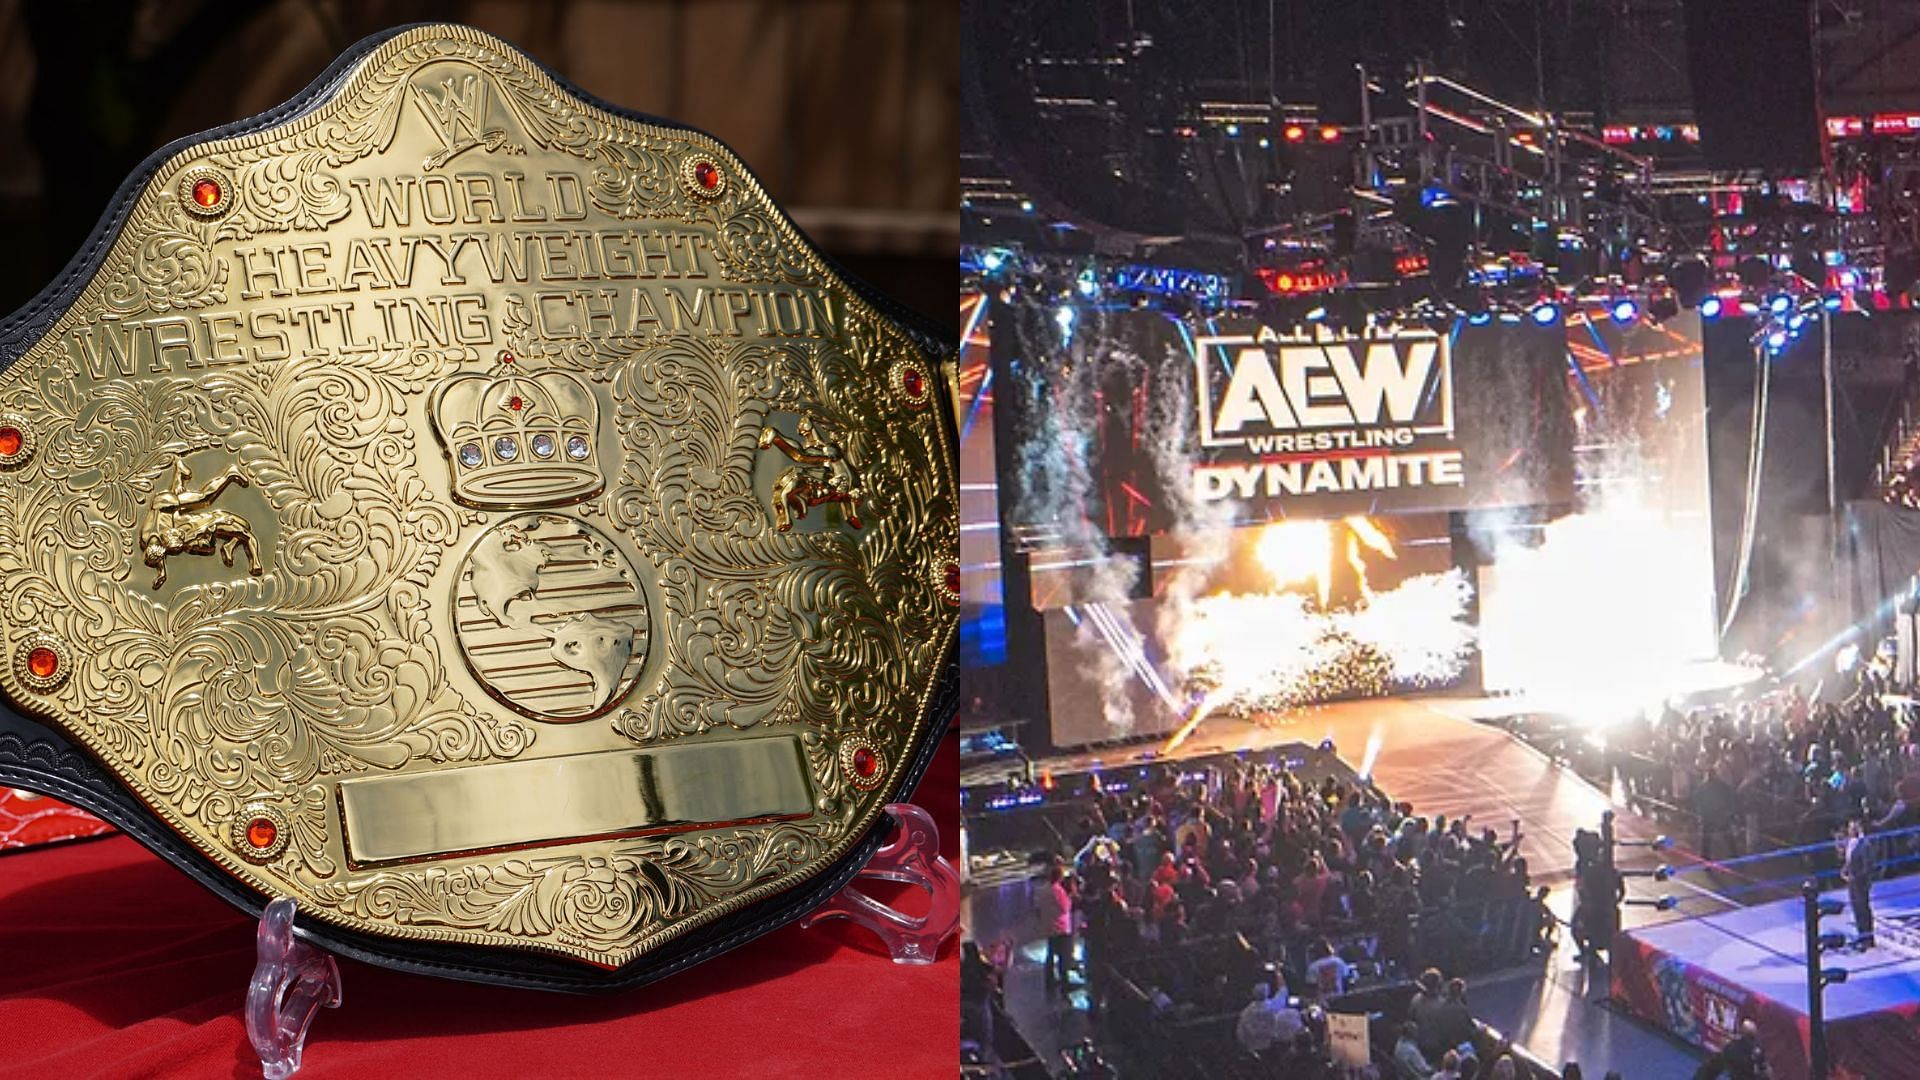 Former World Champion has stated that he does not watch AEW